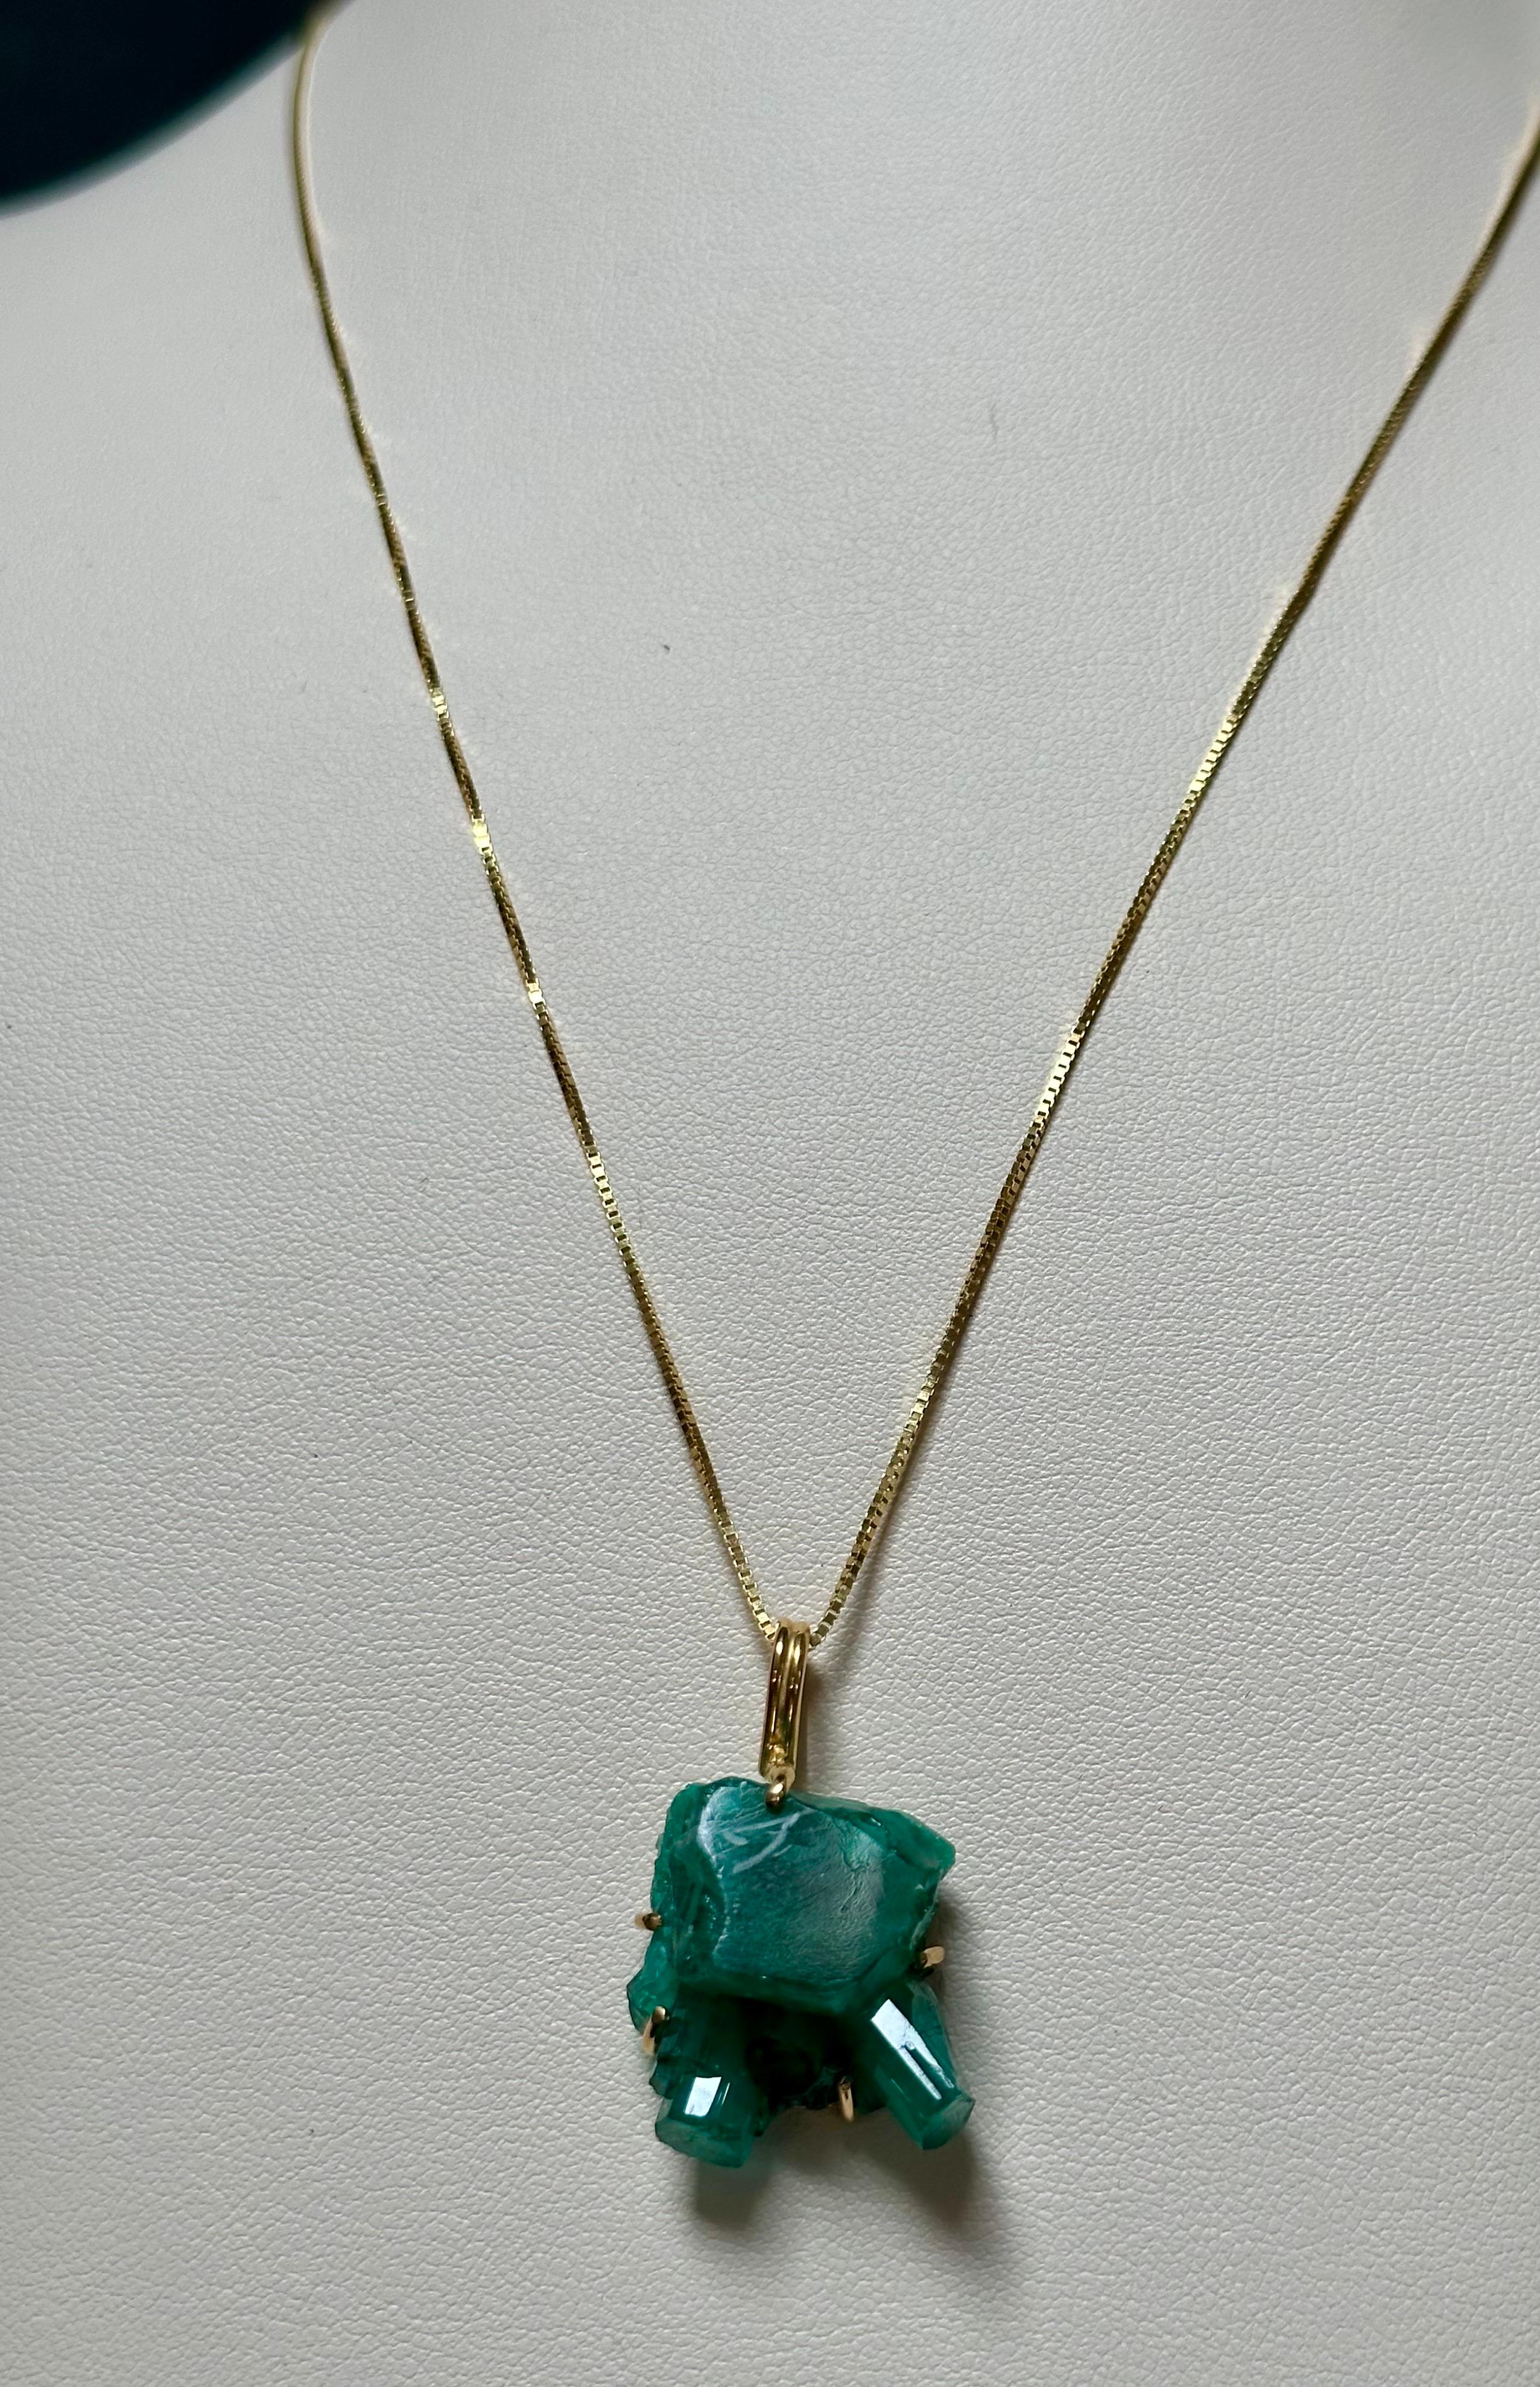 25 Carat Colombian Emerald Rough Pendent/Necklace 18 Karat Gold with 18 KG Chain For Sale 7